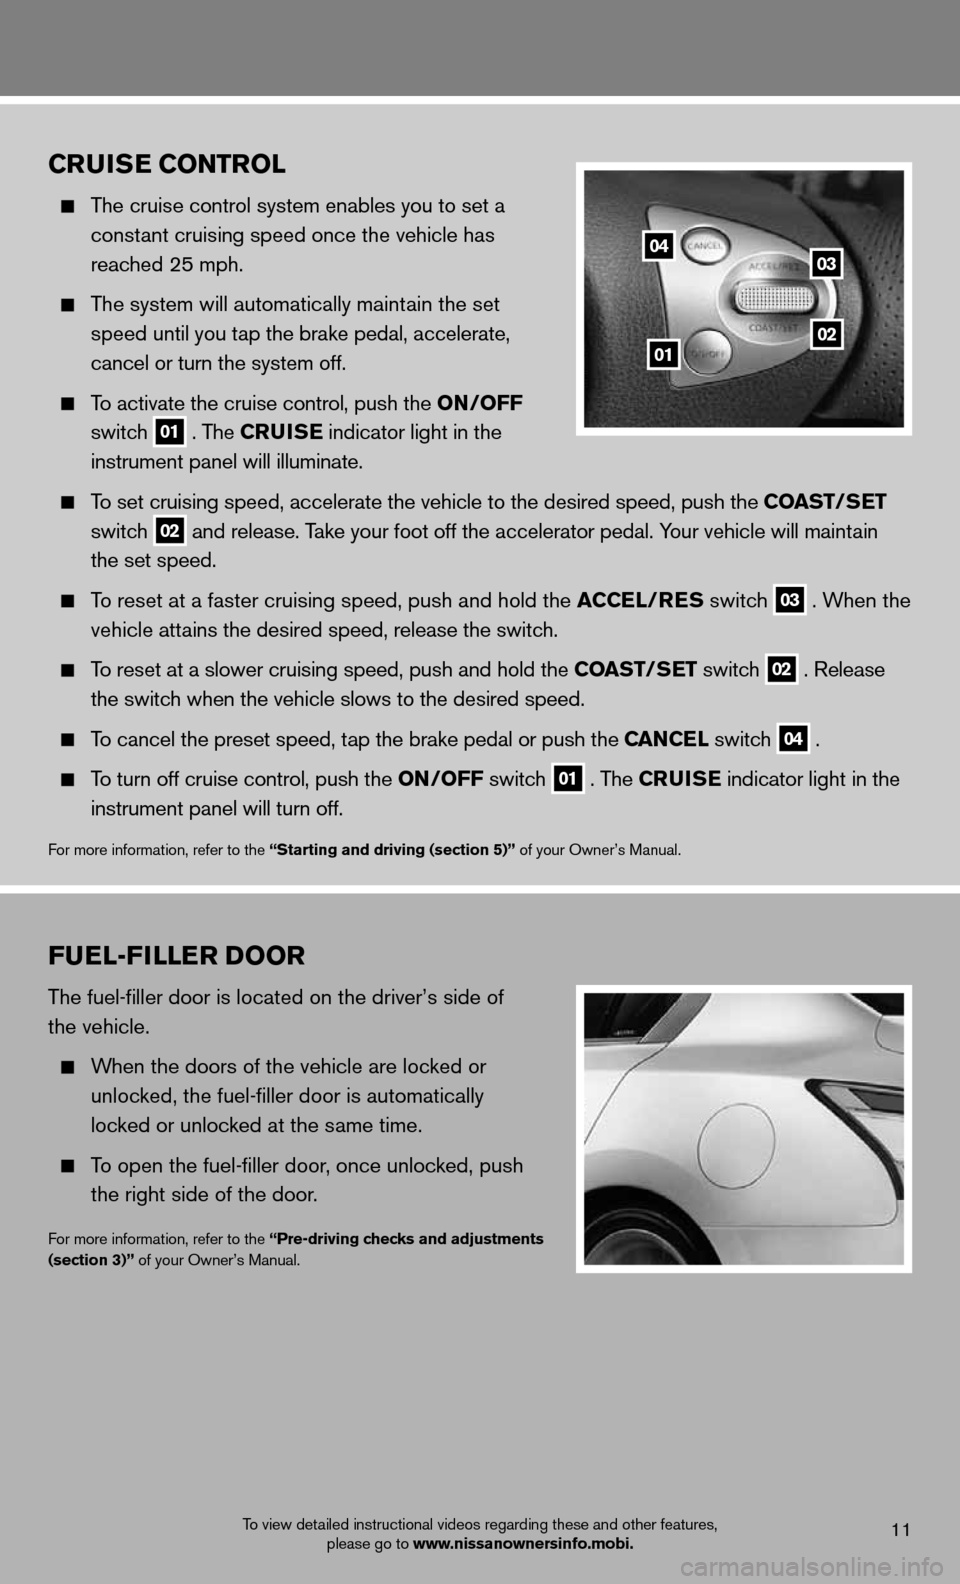 NISSAN MAXIMA 2012 A35 / 7.G Quick Reference Guide To view detailed instructional videos regarding these and other features, please go to www.nissanownersinfo.mobi.
fuEl-fillE r Door
The fuel-filler door is located on the driver’s side of  
the vehi